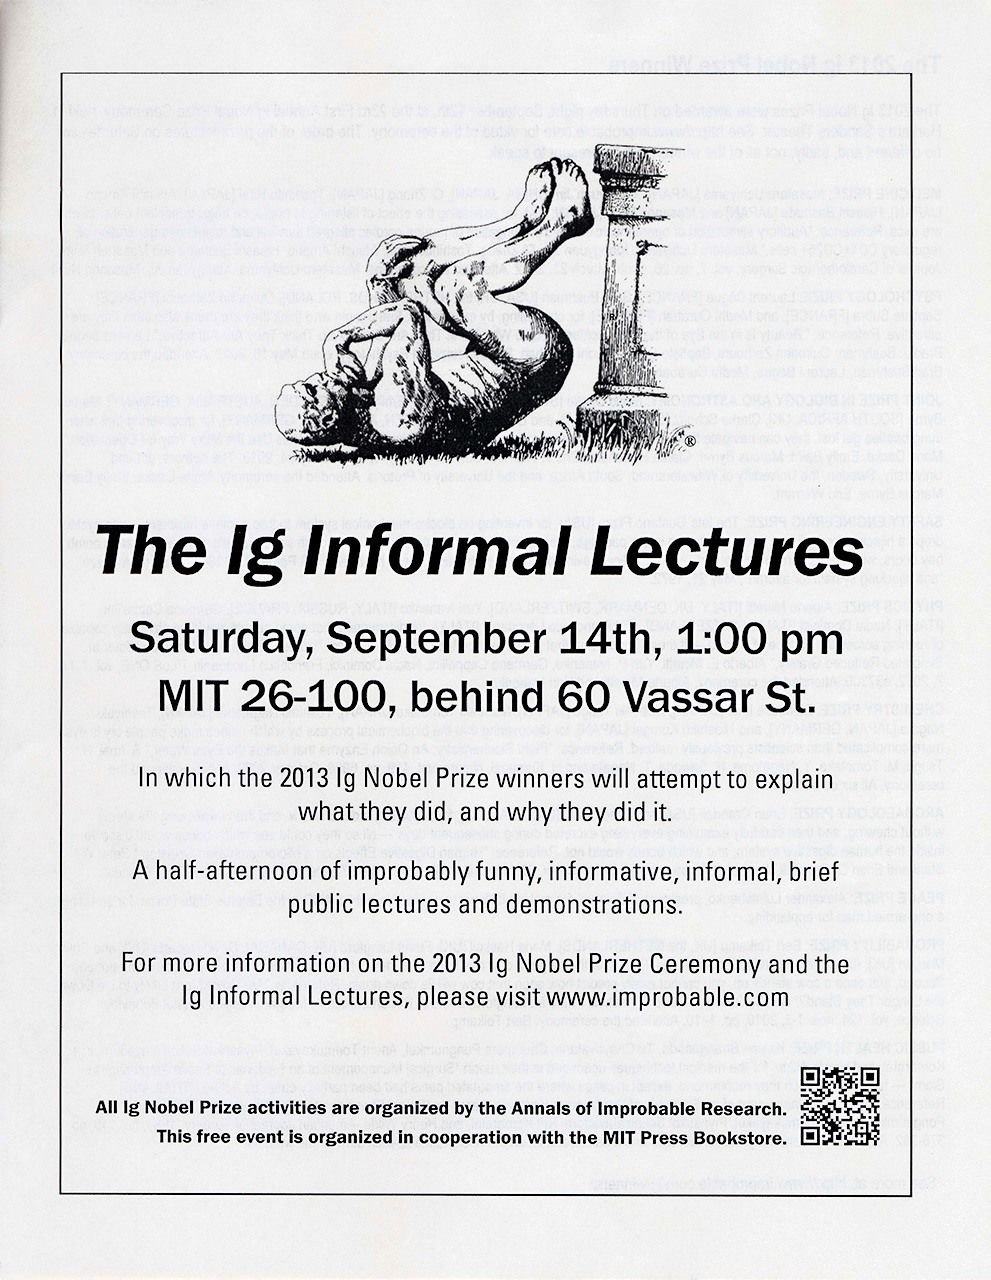 A leaflet advertising Ig Nobel lectures at the Massachusetts Institute of Technology, the day after the ceremony. (Courtesy Uchiyama Masateru)